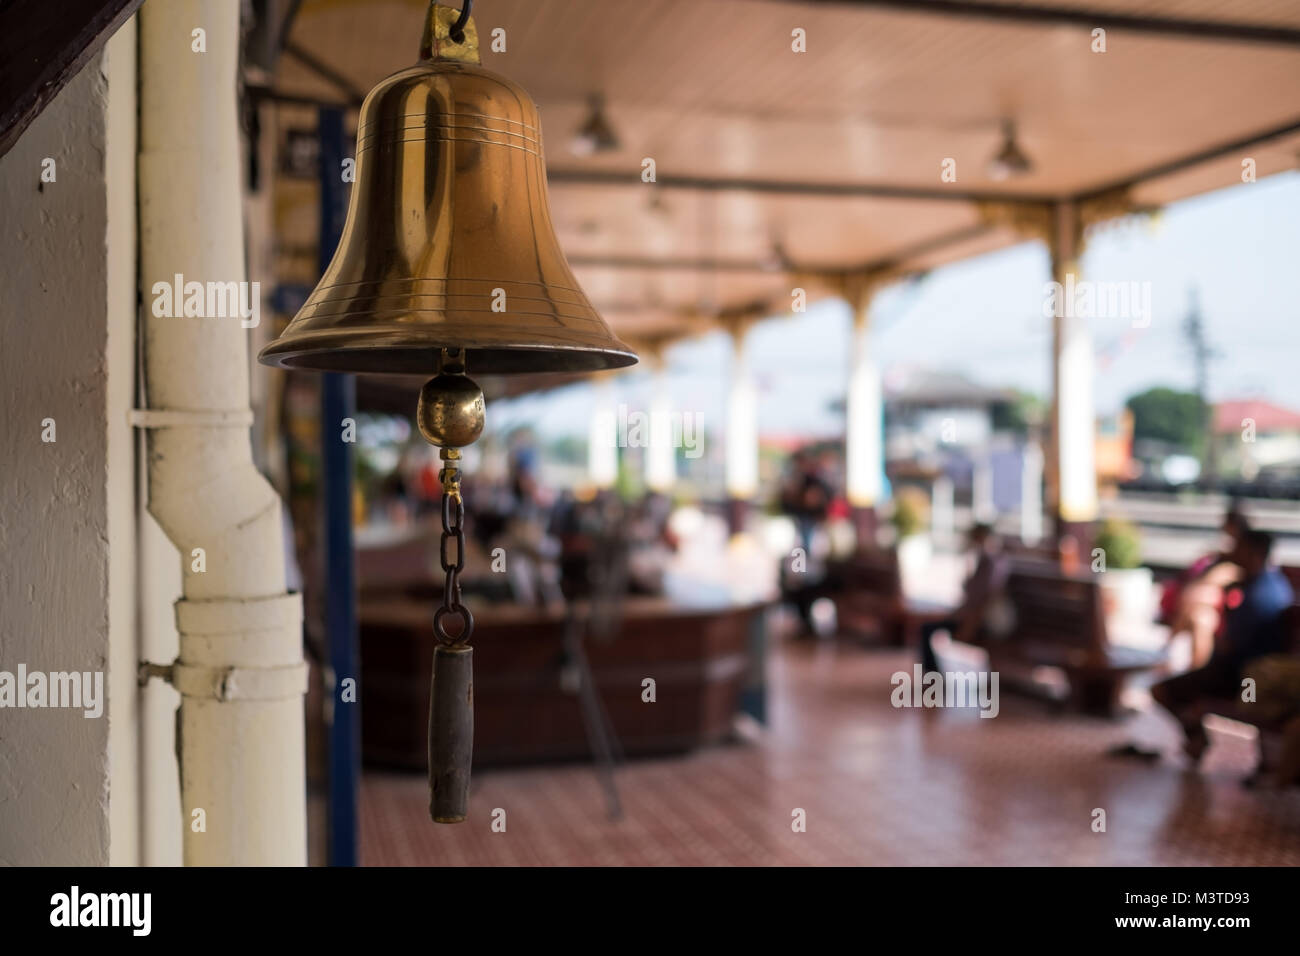 The old bell rings in train station in Thailand Stock Photo